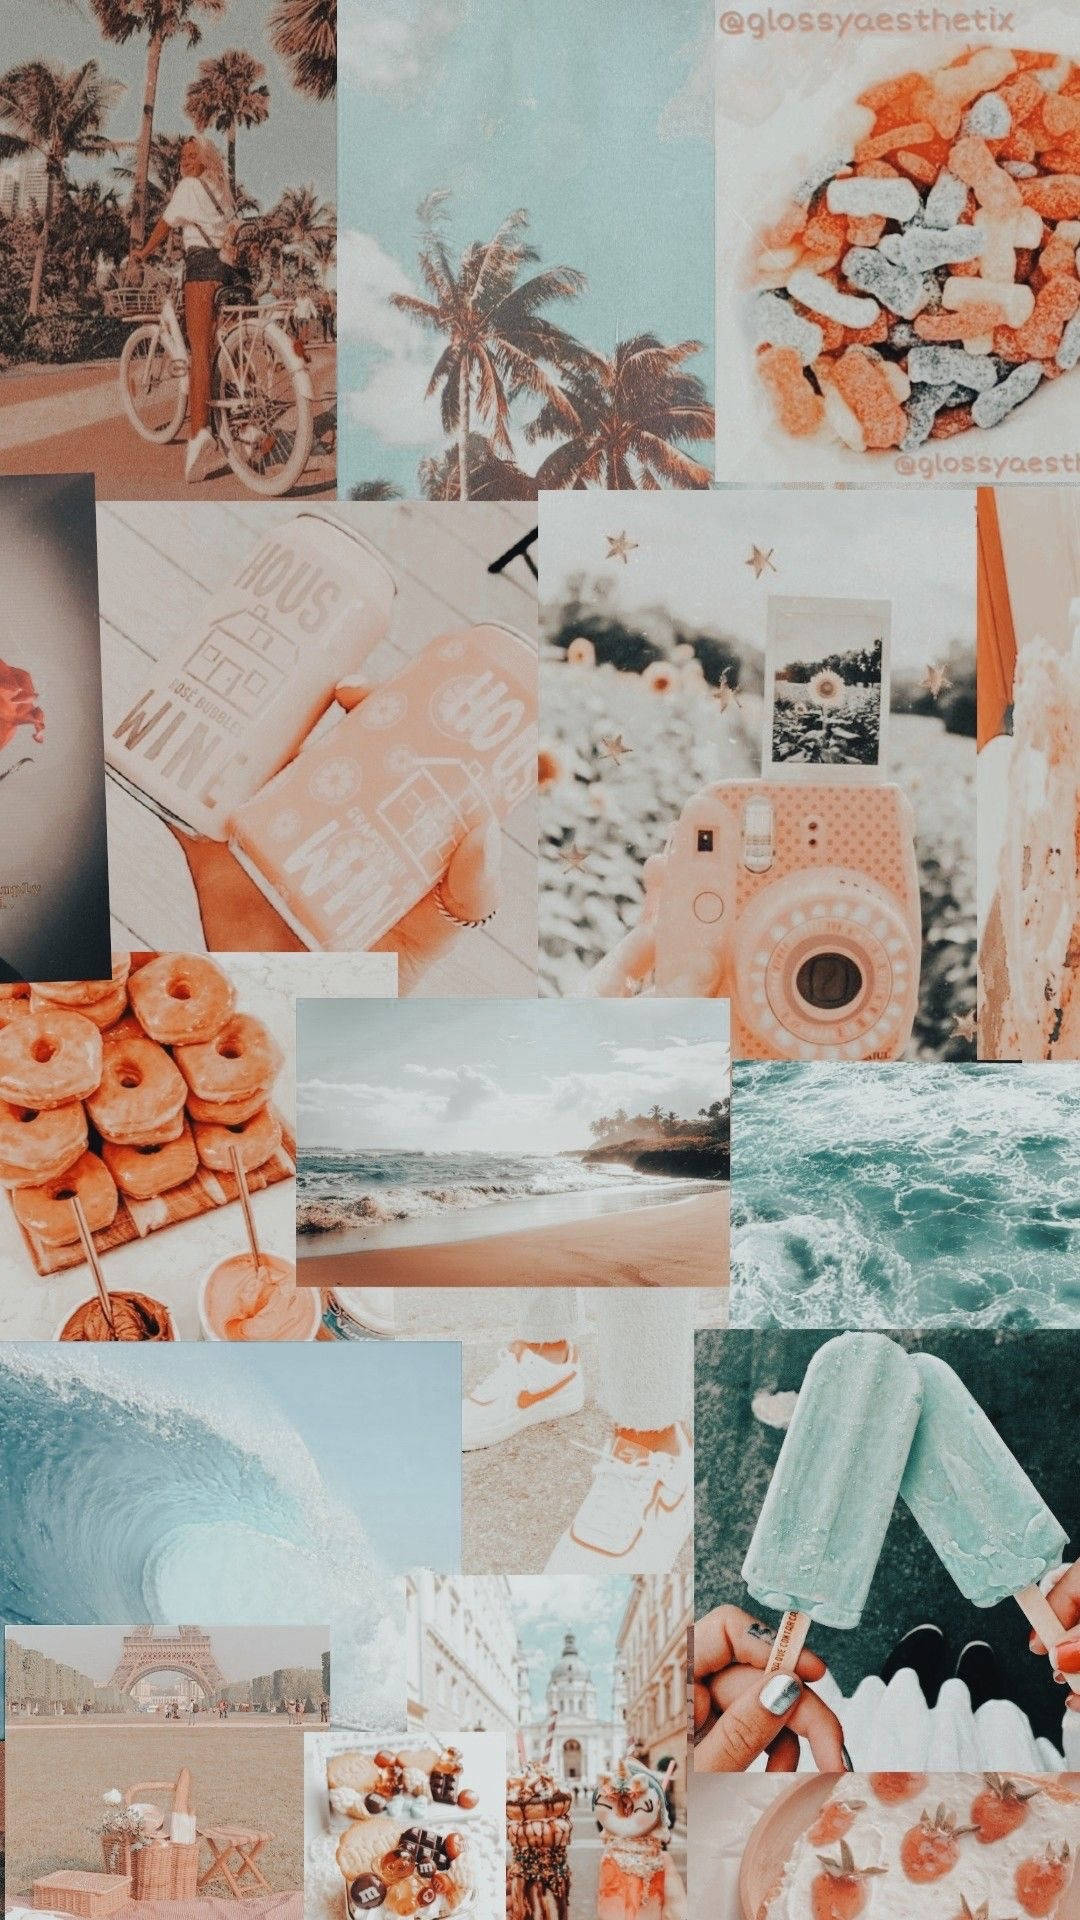 A Collage Of Pictures Of Beach, Beach, And Other Things